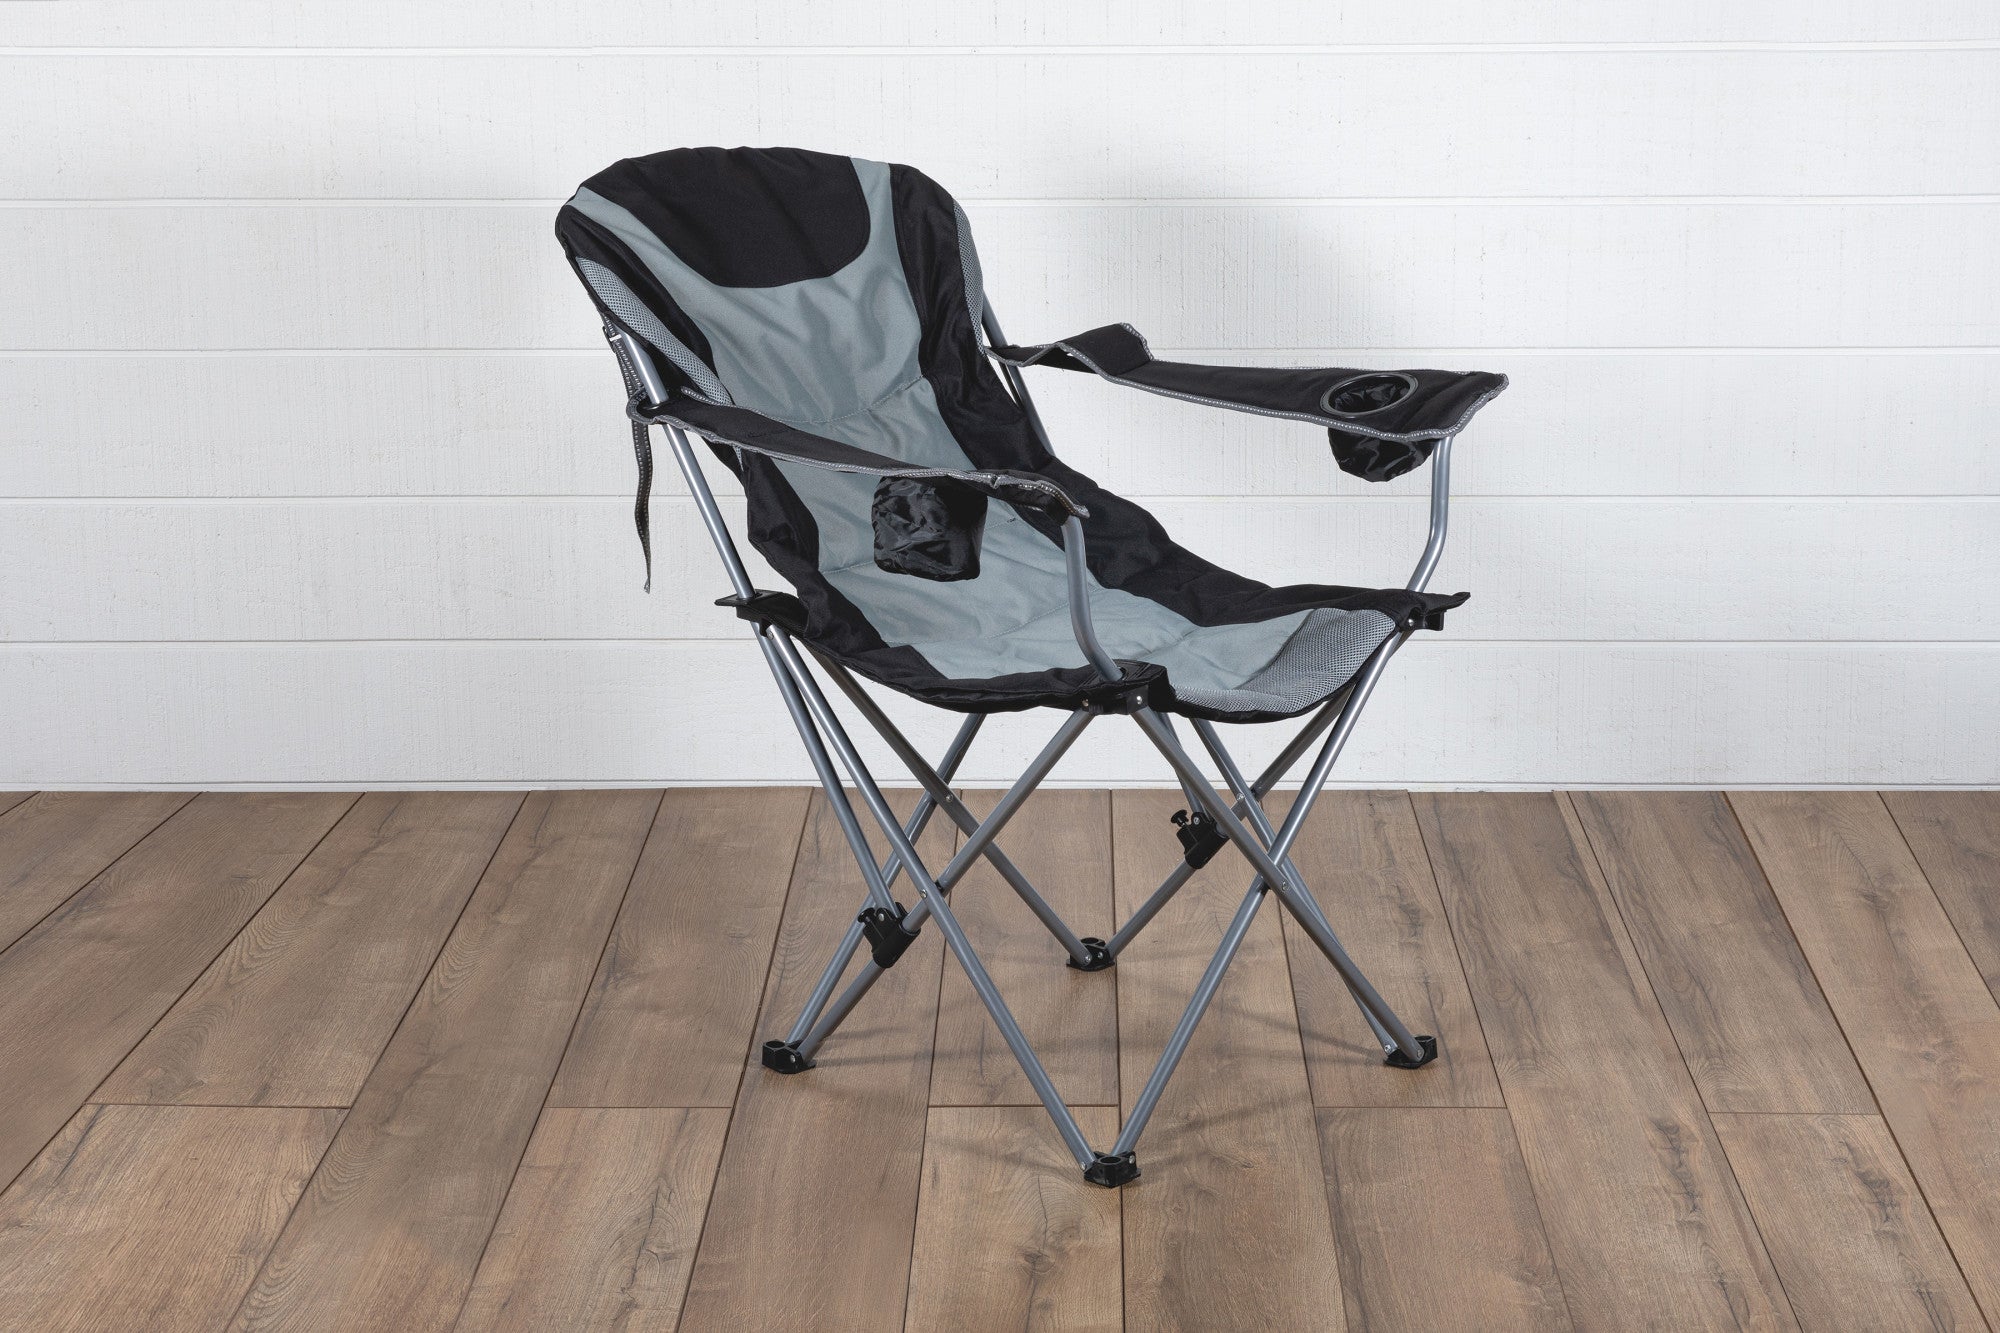 Pittsburgh Penguins - Reclining Camp Chair